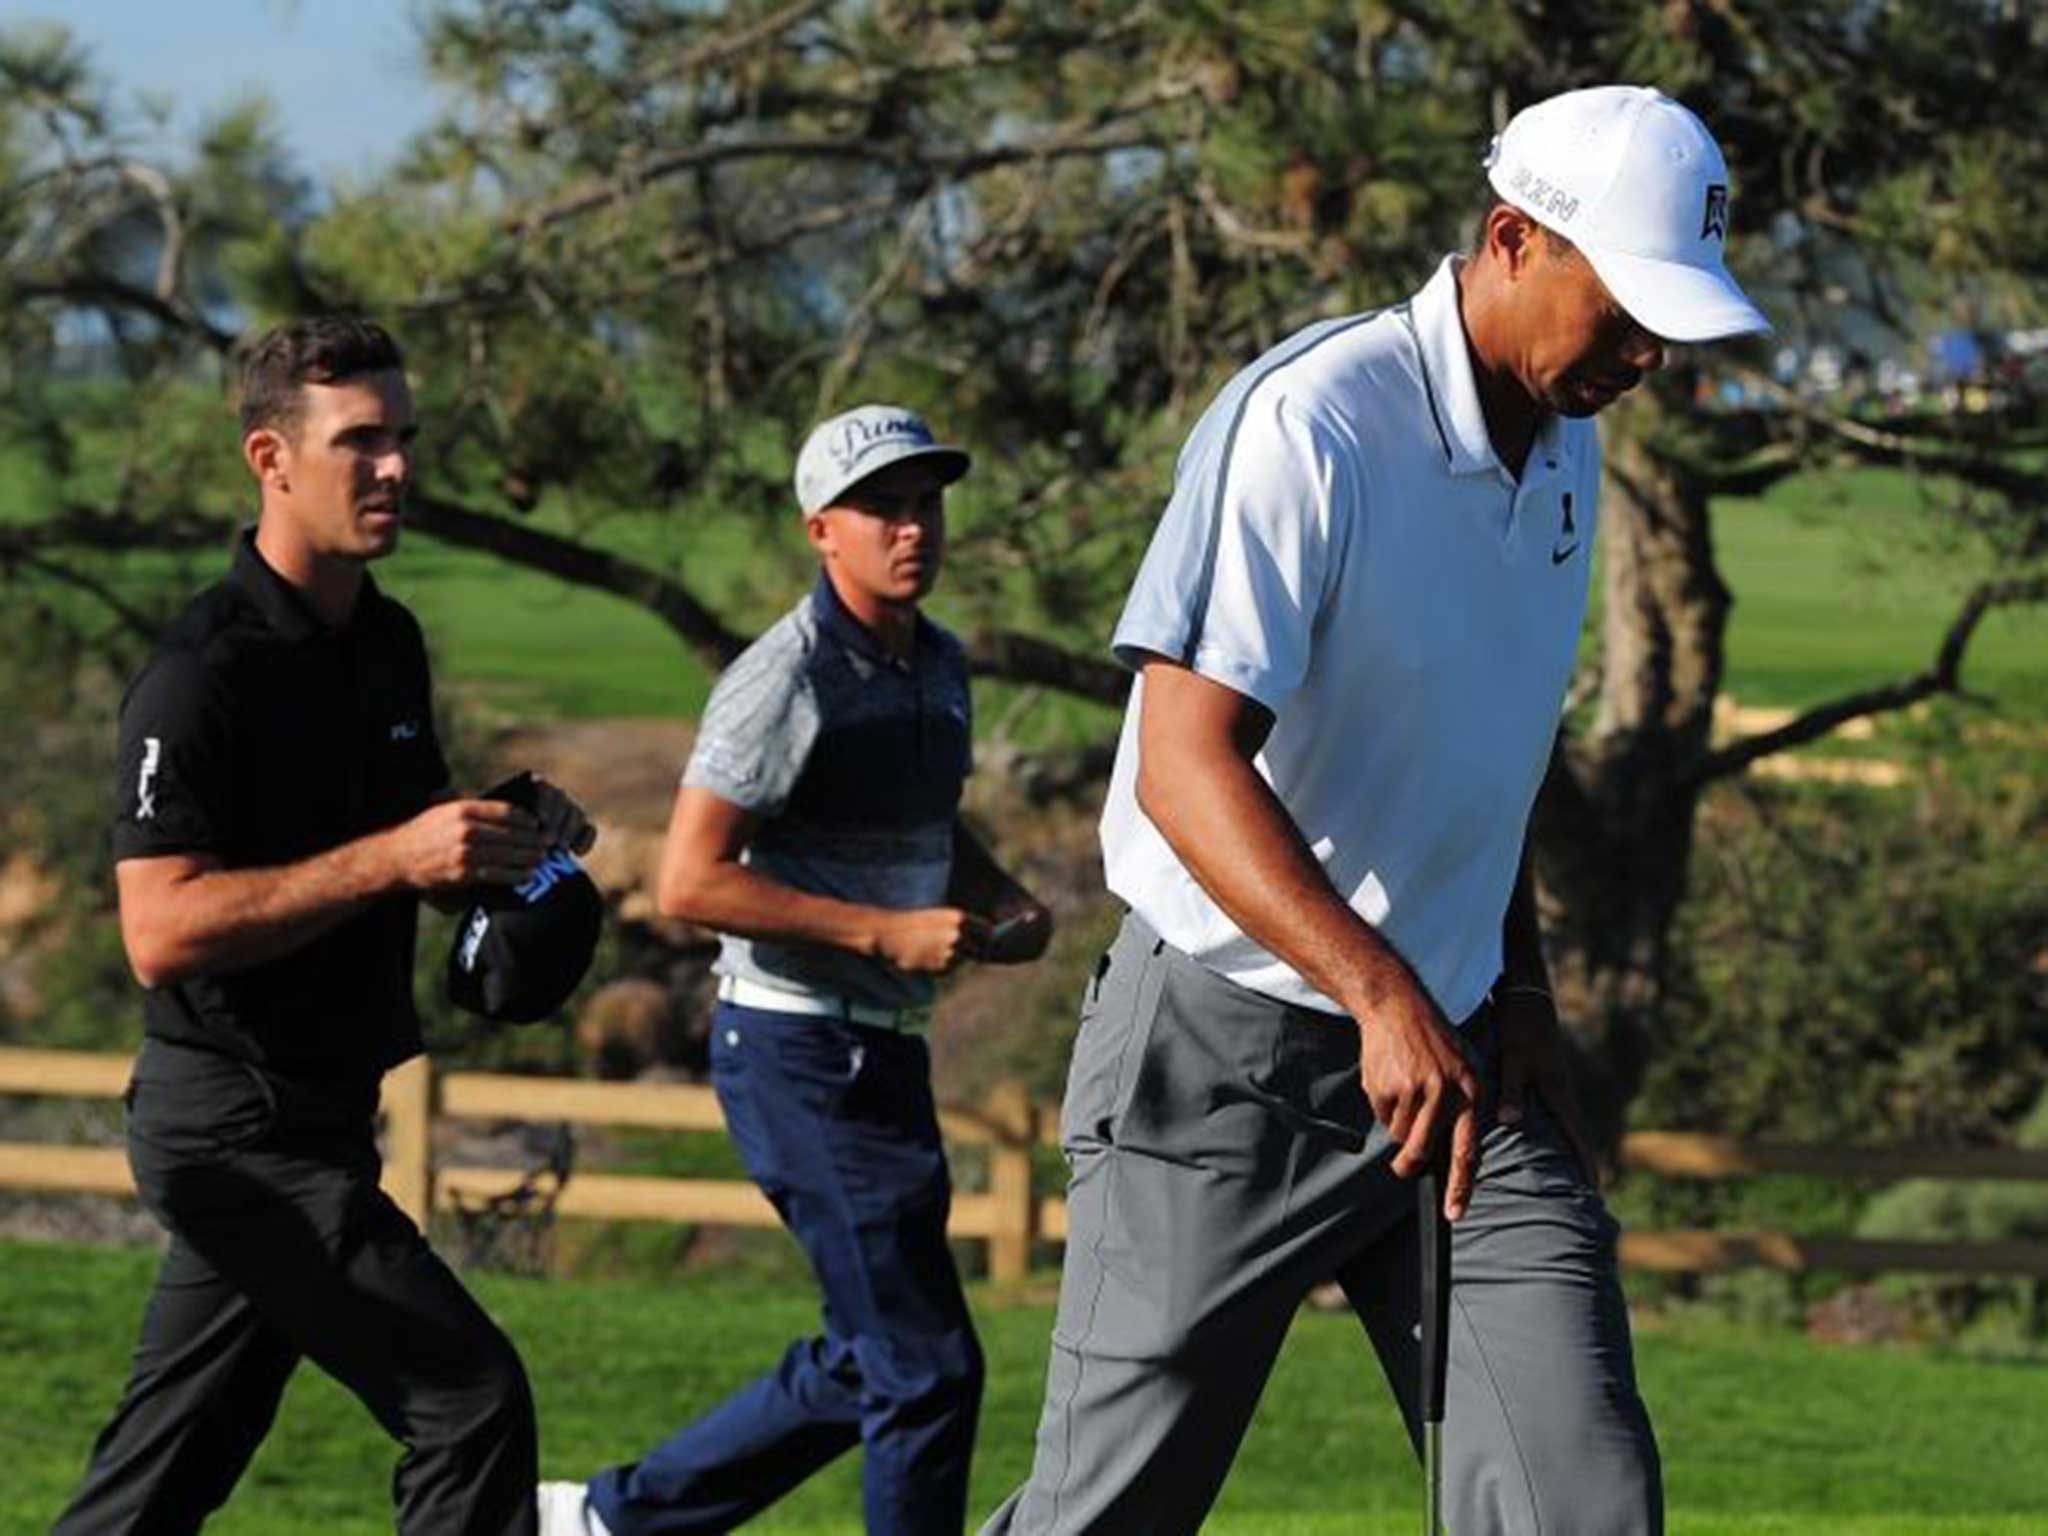 A grimacing Tiger Woods walks off the Torrey Pines course in San Diego, retiring after completing just 11 holes 